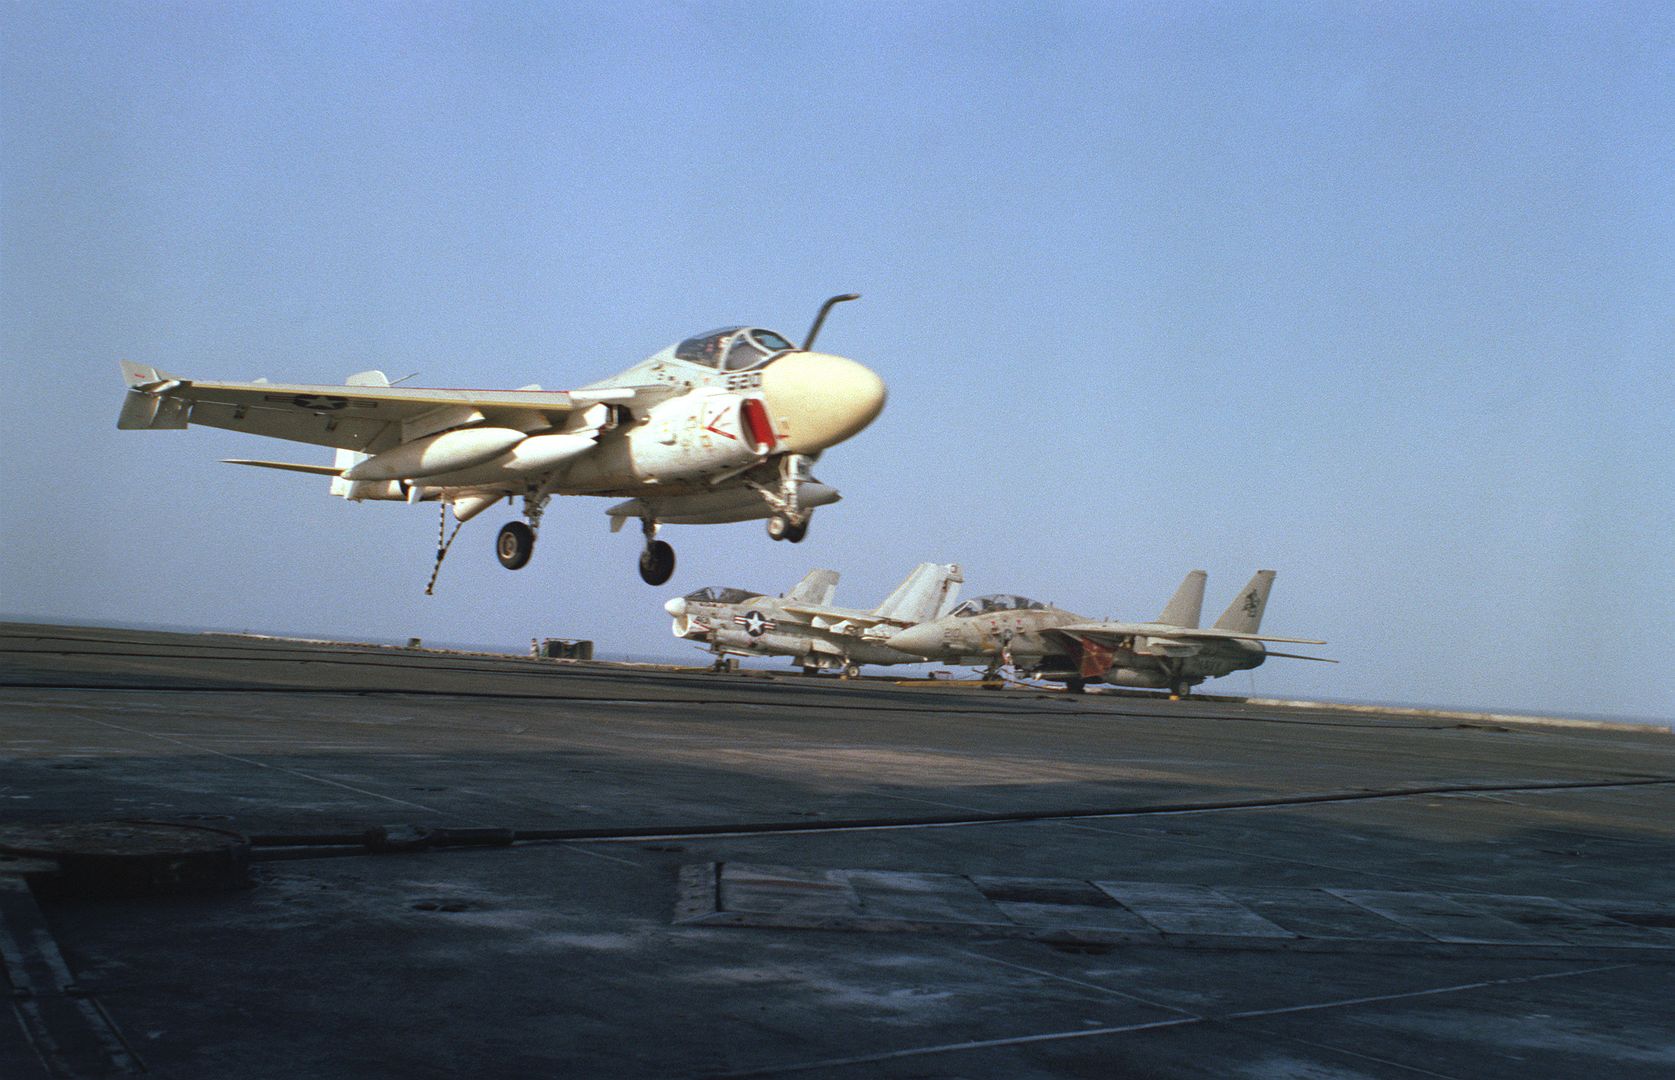  In The Background Are An A 7E Corsair II And An F 14A Tomcat Aircraft